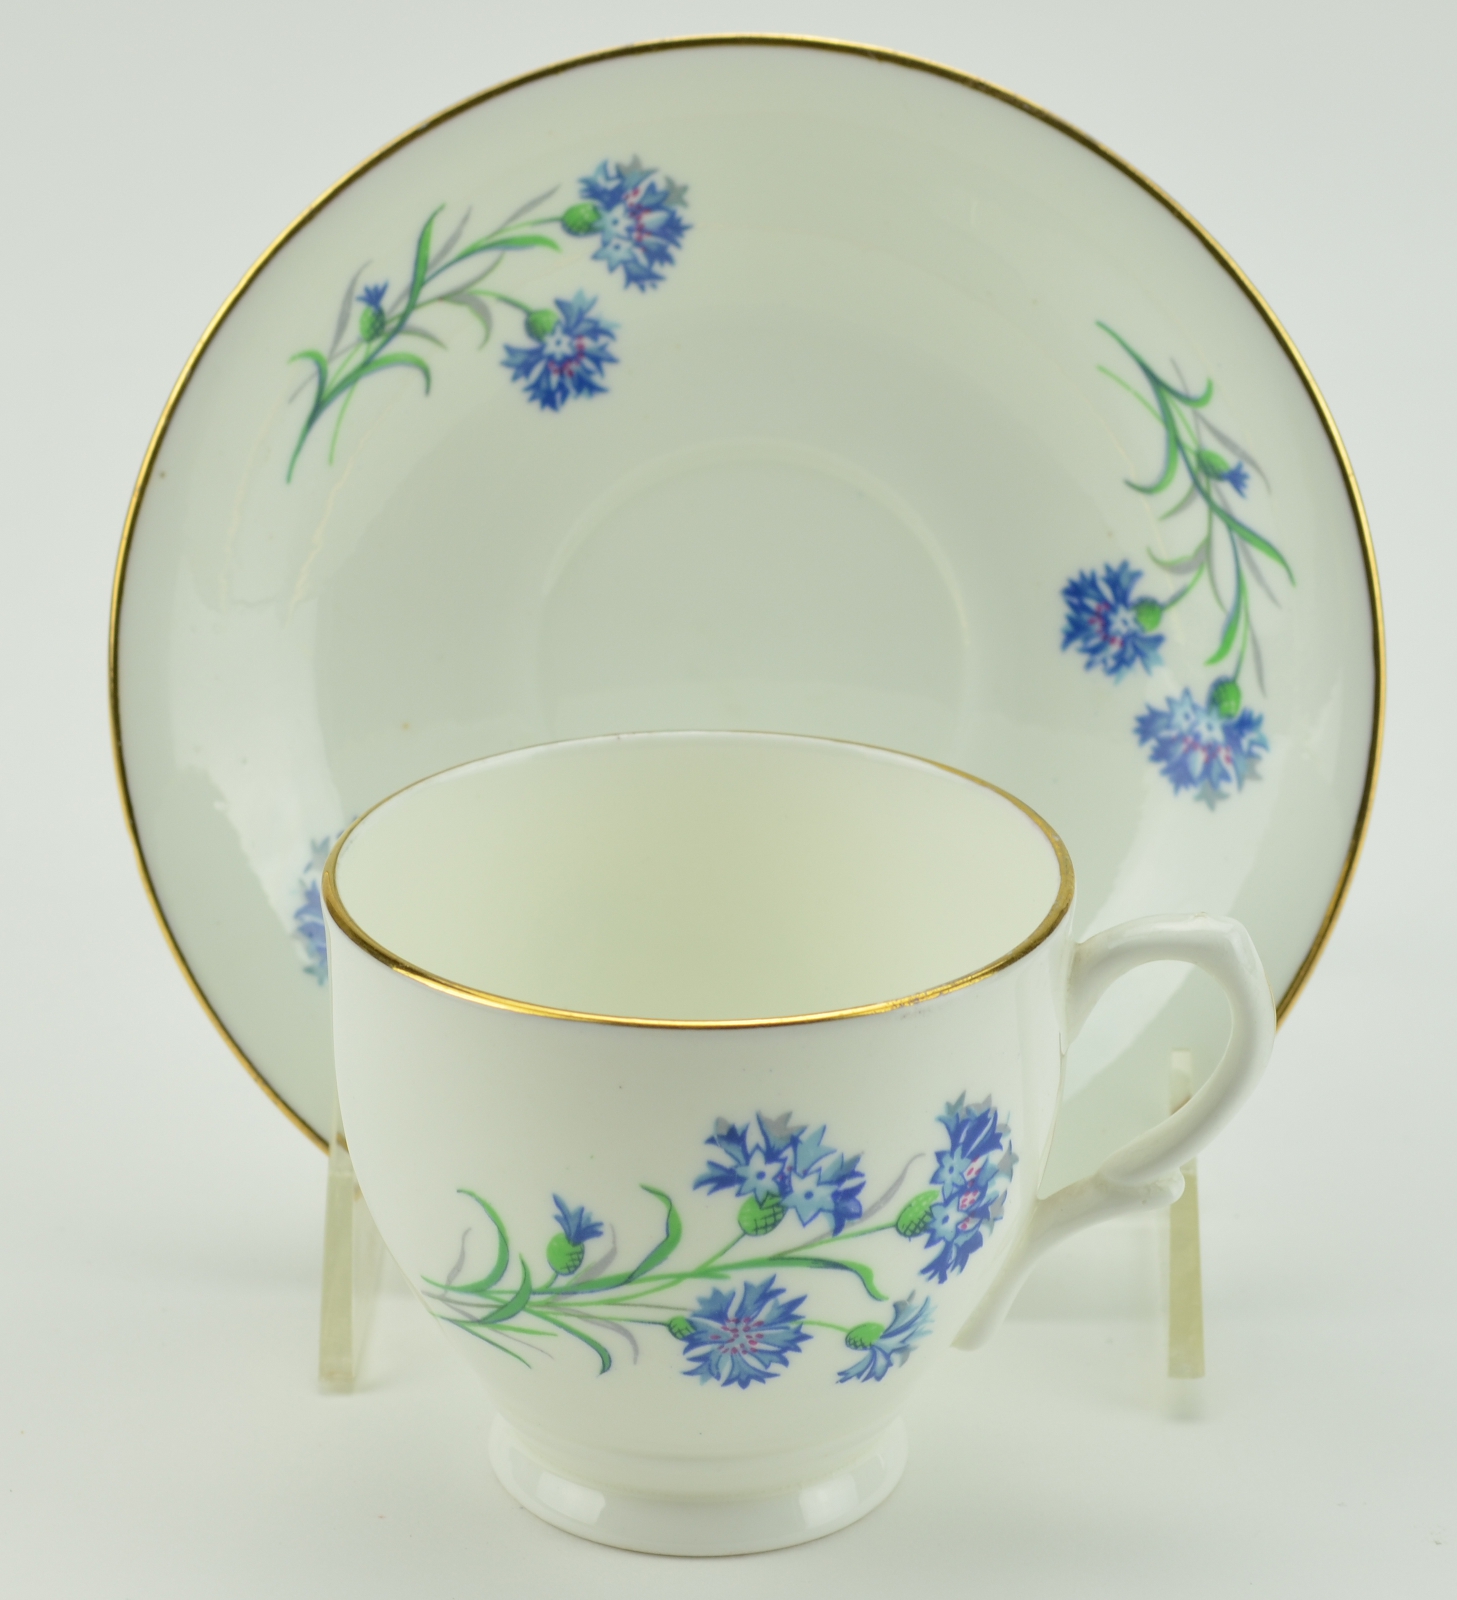 Collectible Bone China Tea Cup & Saucer - Blue Floral Pattern